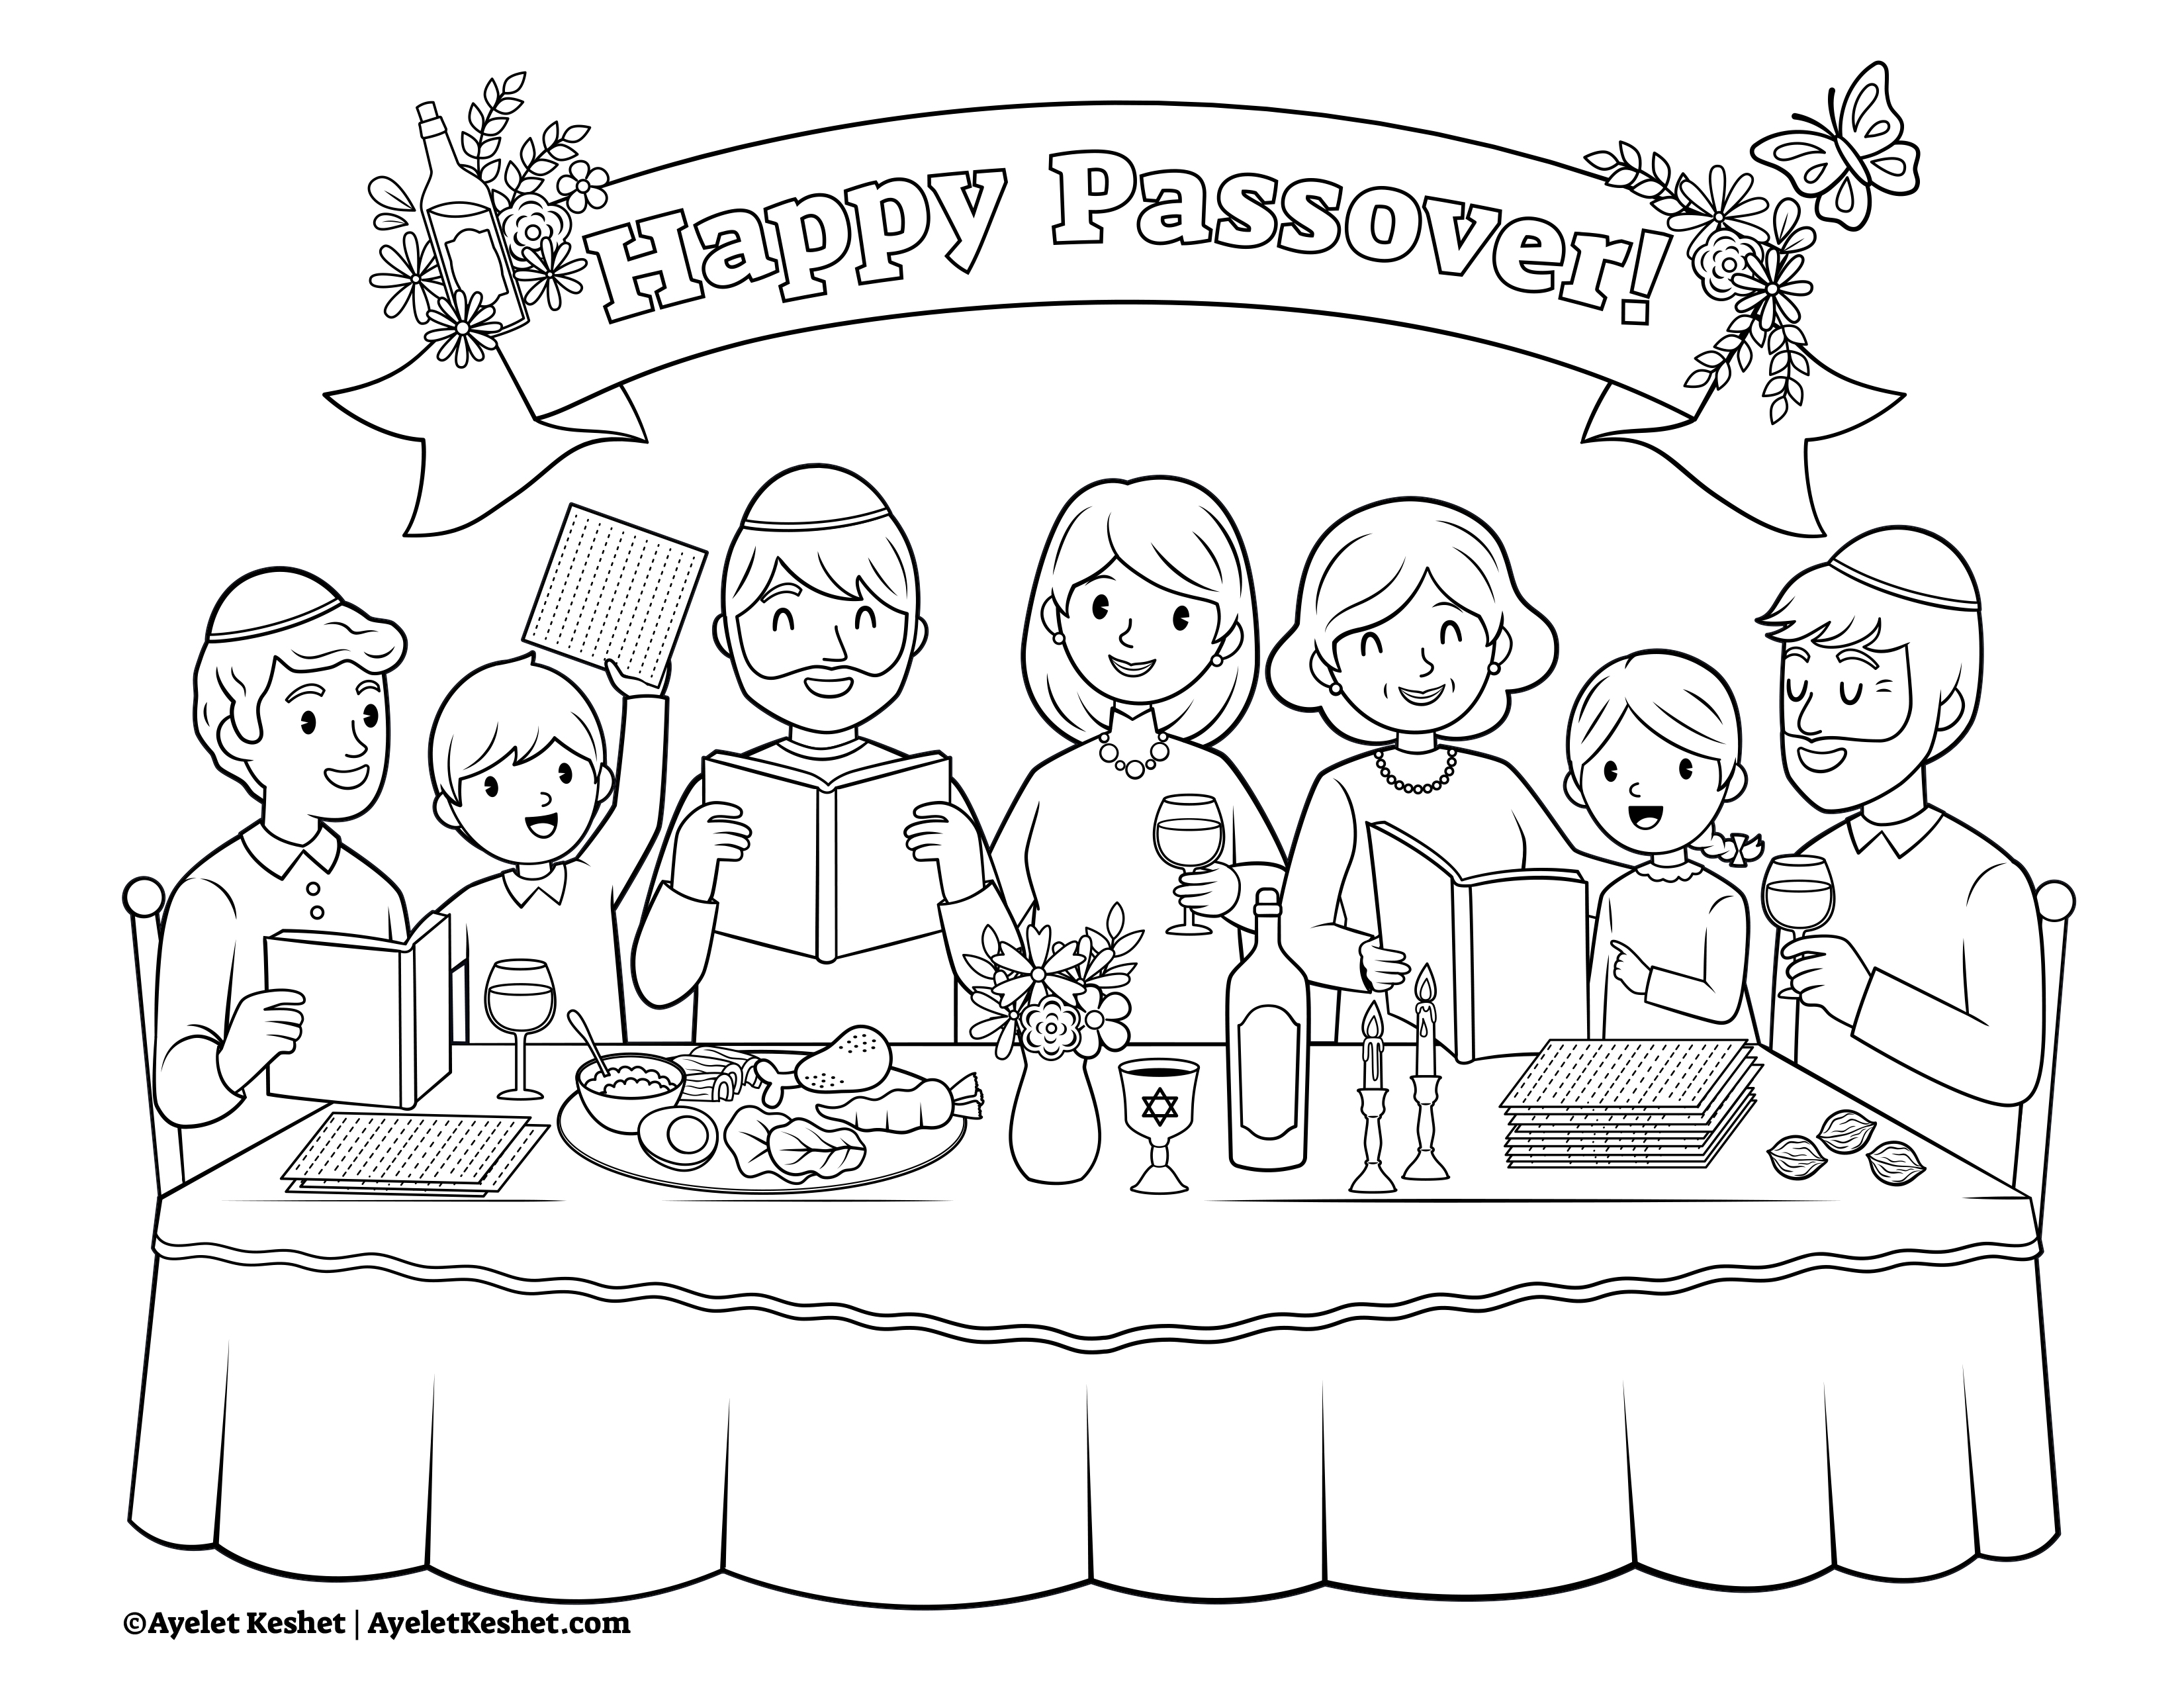 Passover Coloring Pages With Cute Illustrations Ayelet Keshet